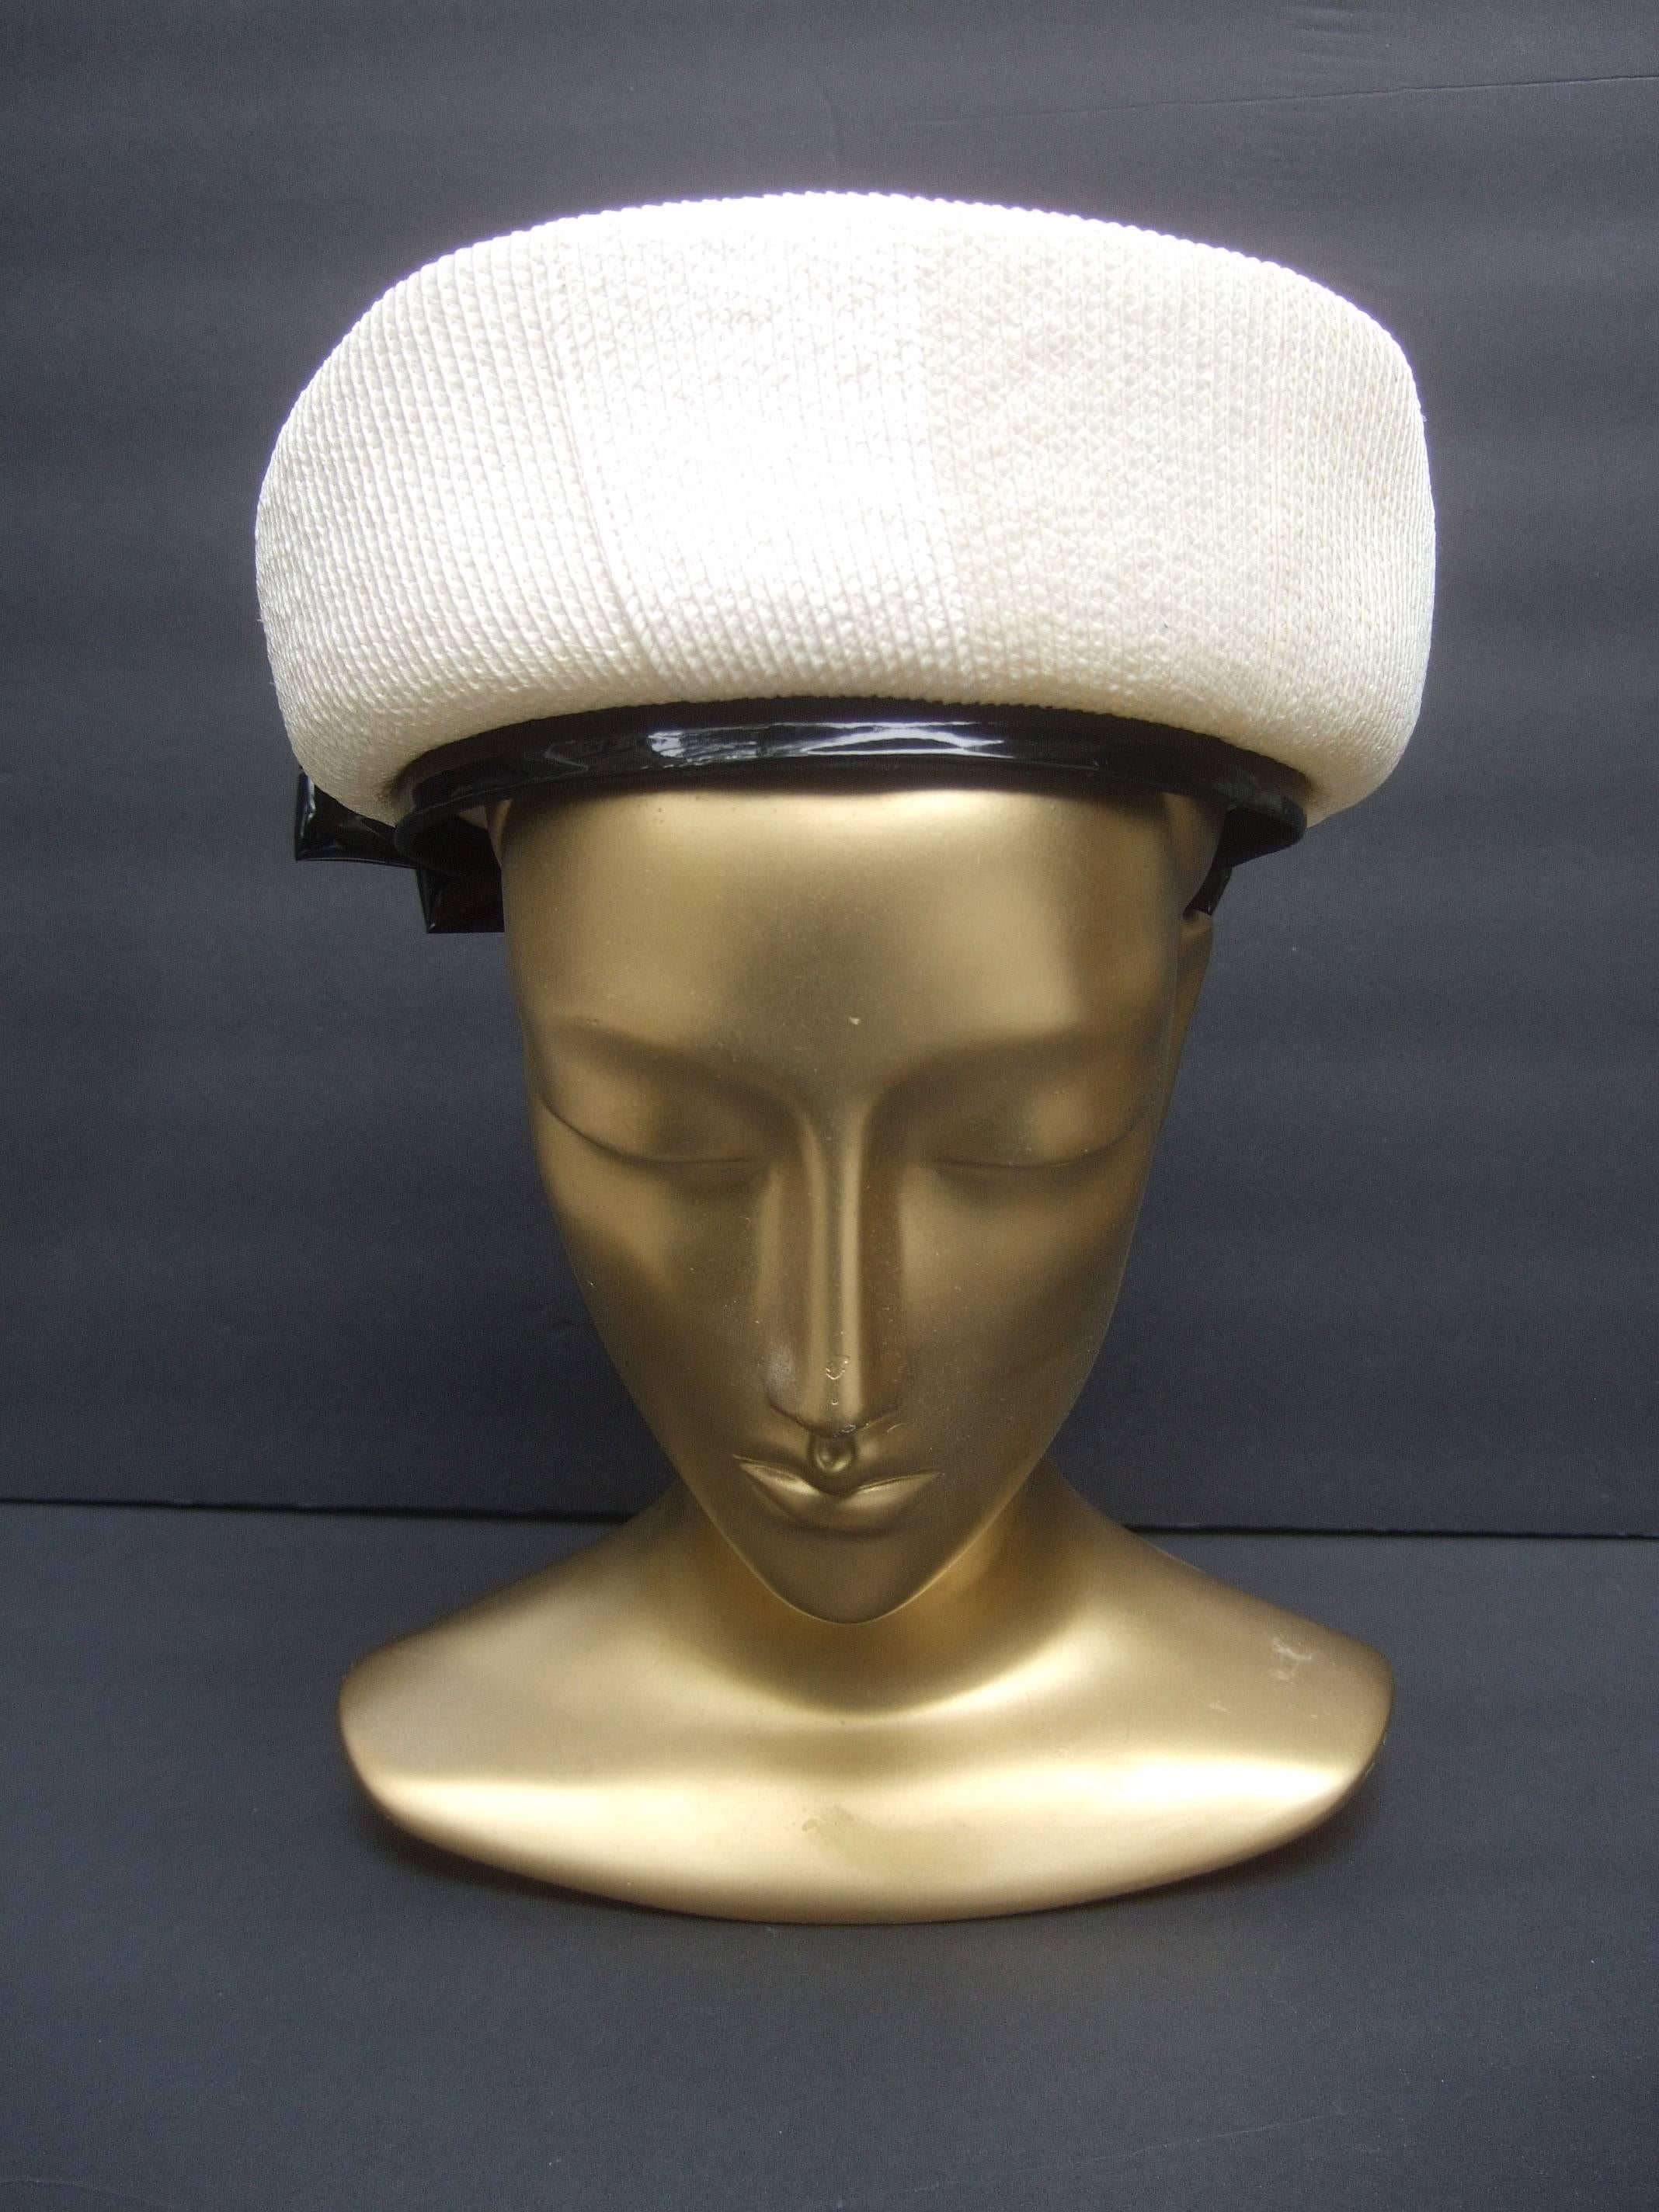 Lilly Dache Parisian style bow trim hat c 1970
The stylish retro had is designed with off white raffia
accented with a large black patent leather bow on the
back side

The interior brim of the hat is framed with a patent
leather band that